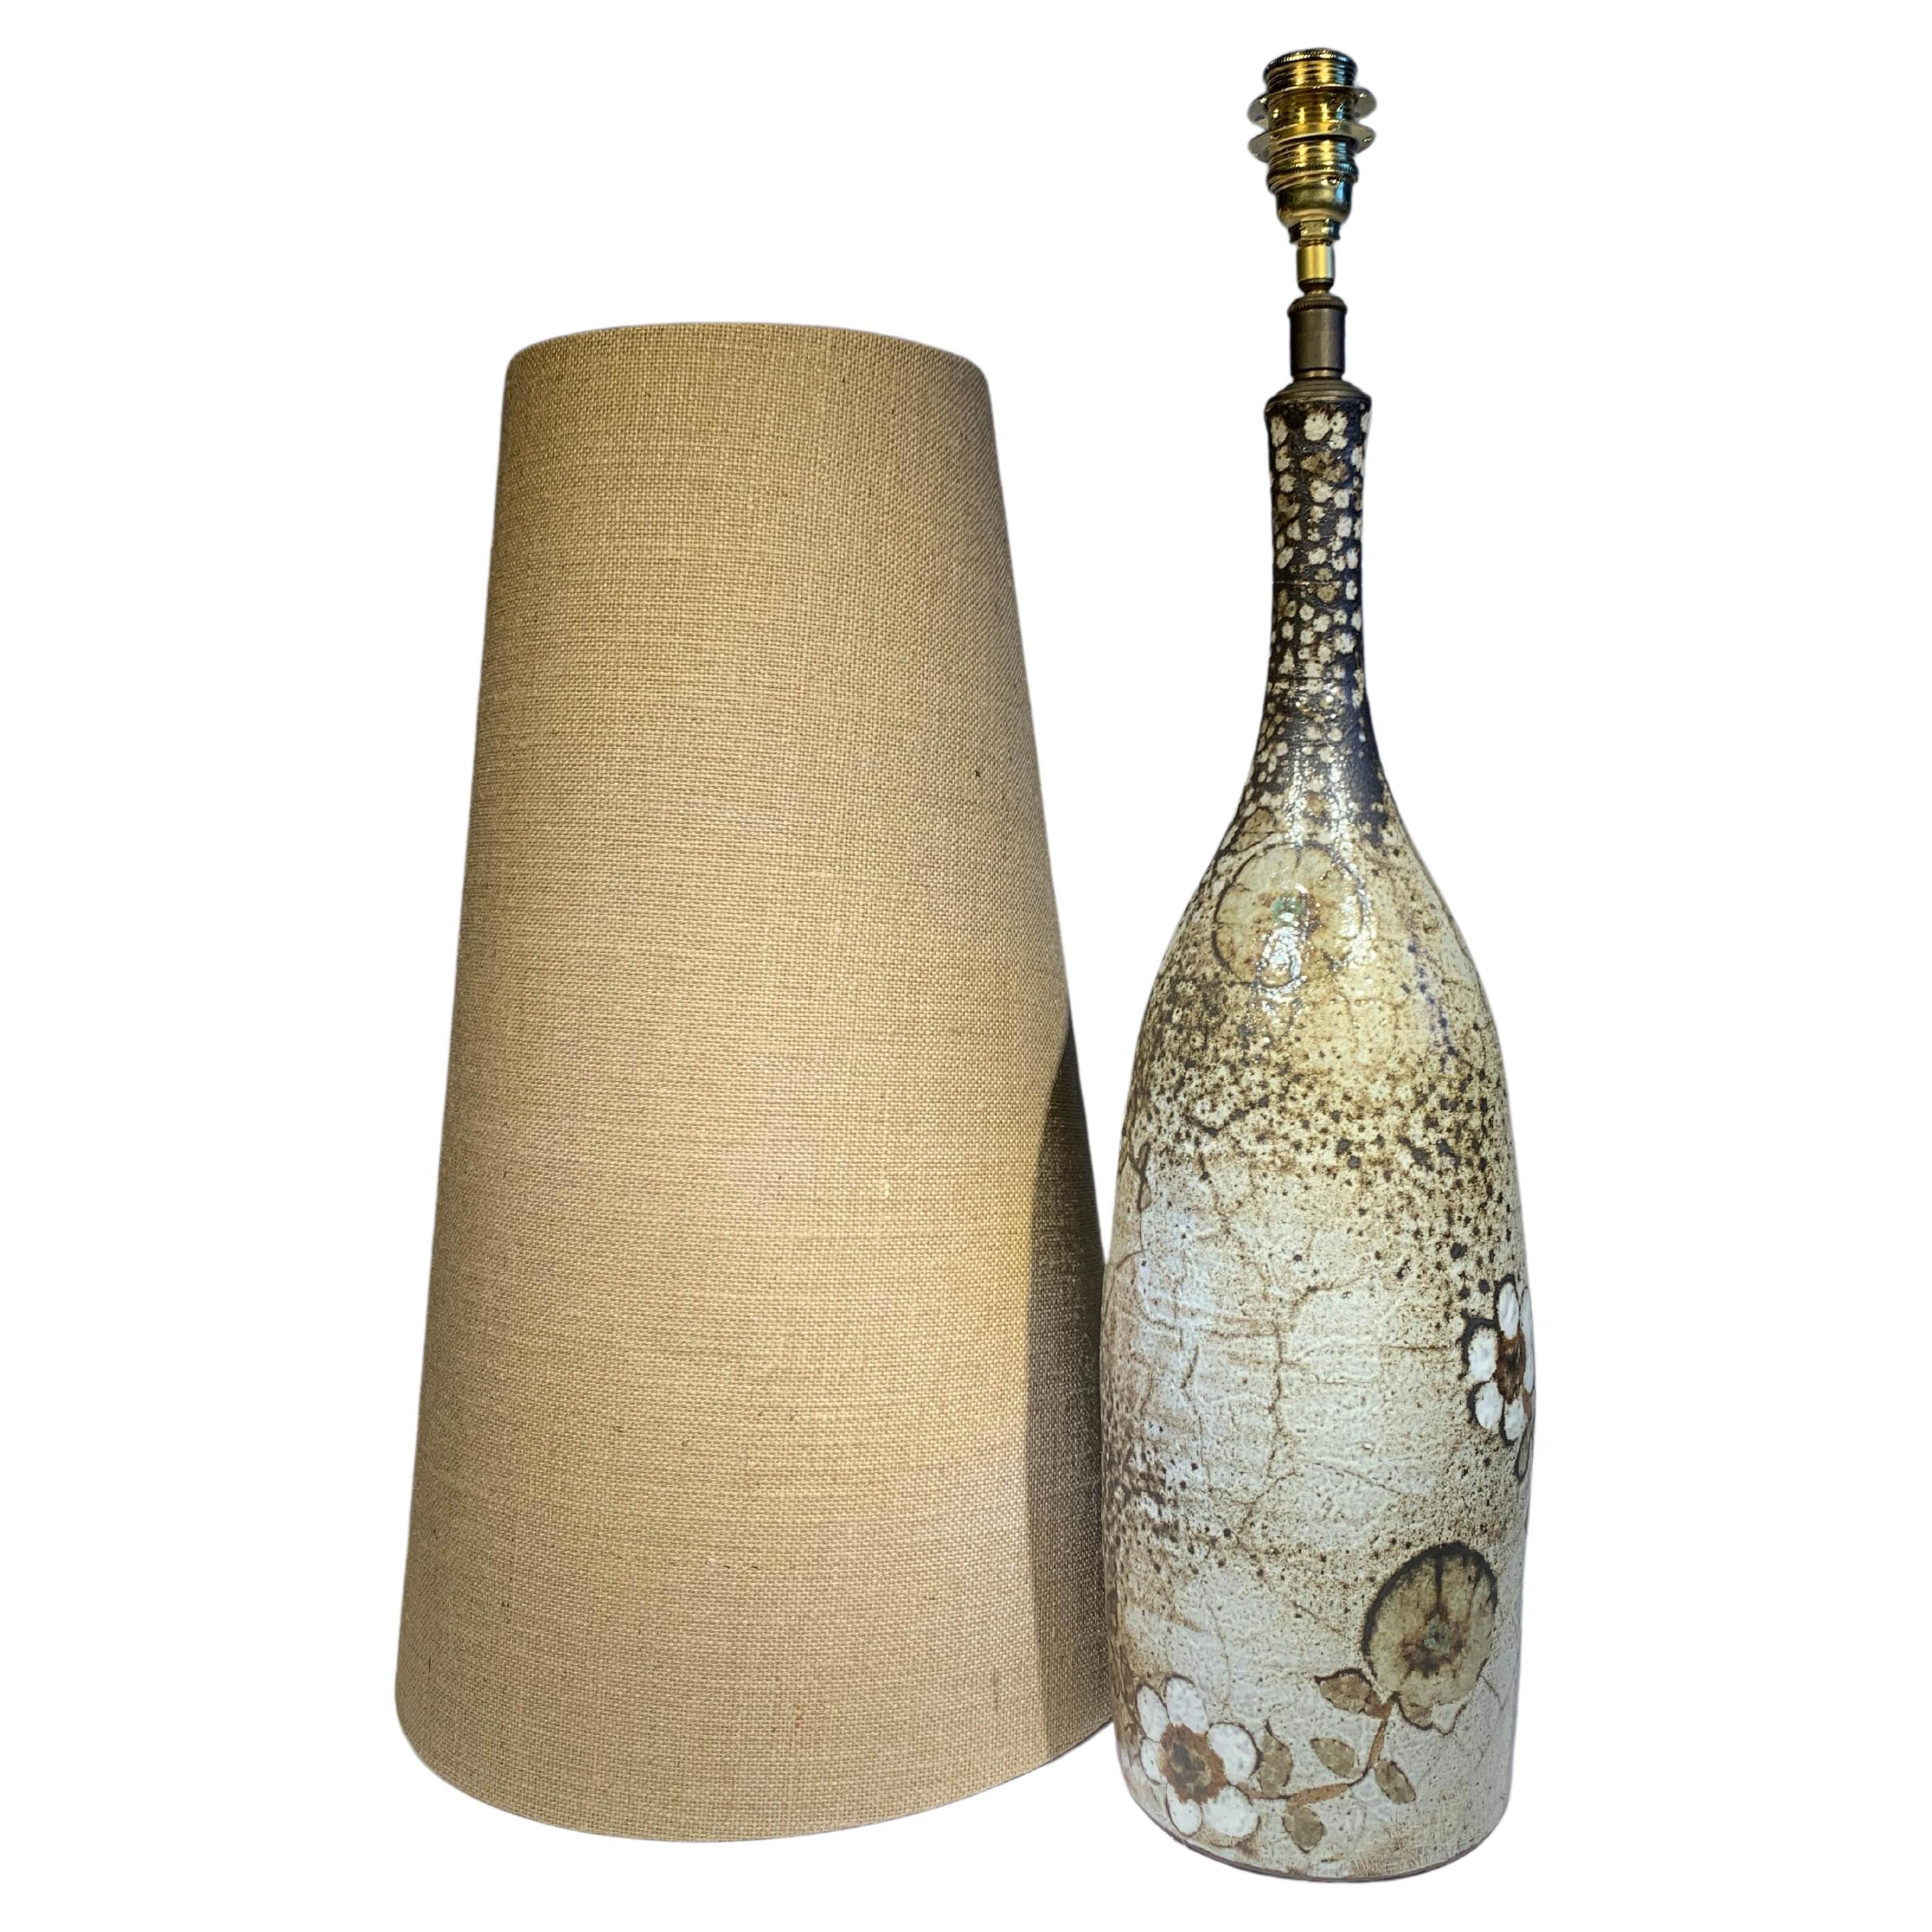 Paul Quere French ceramic table lamp For Sale